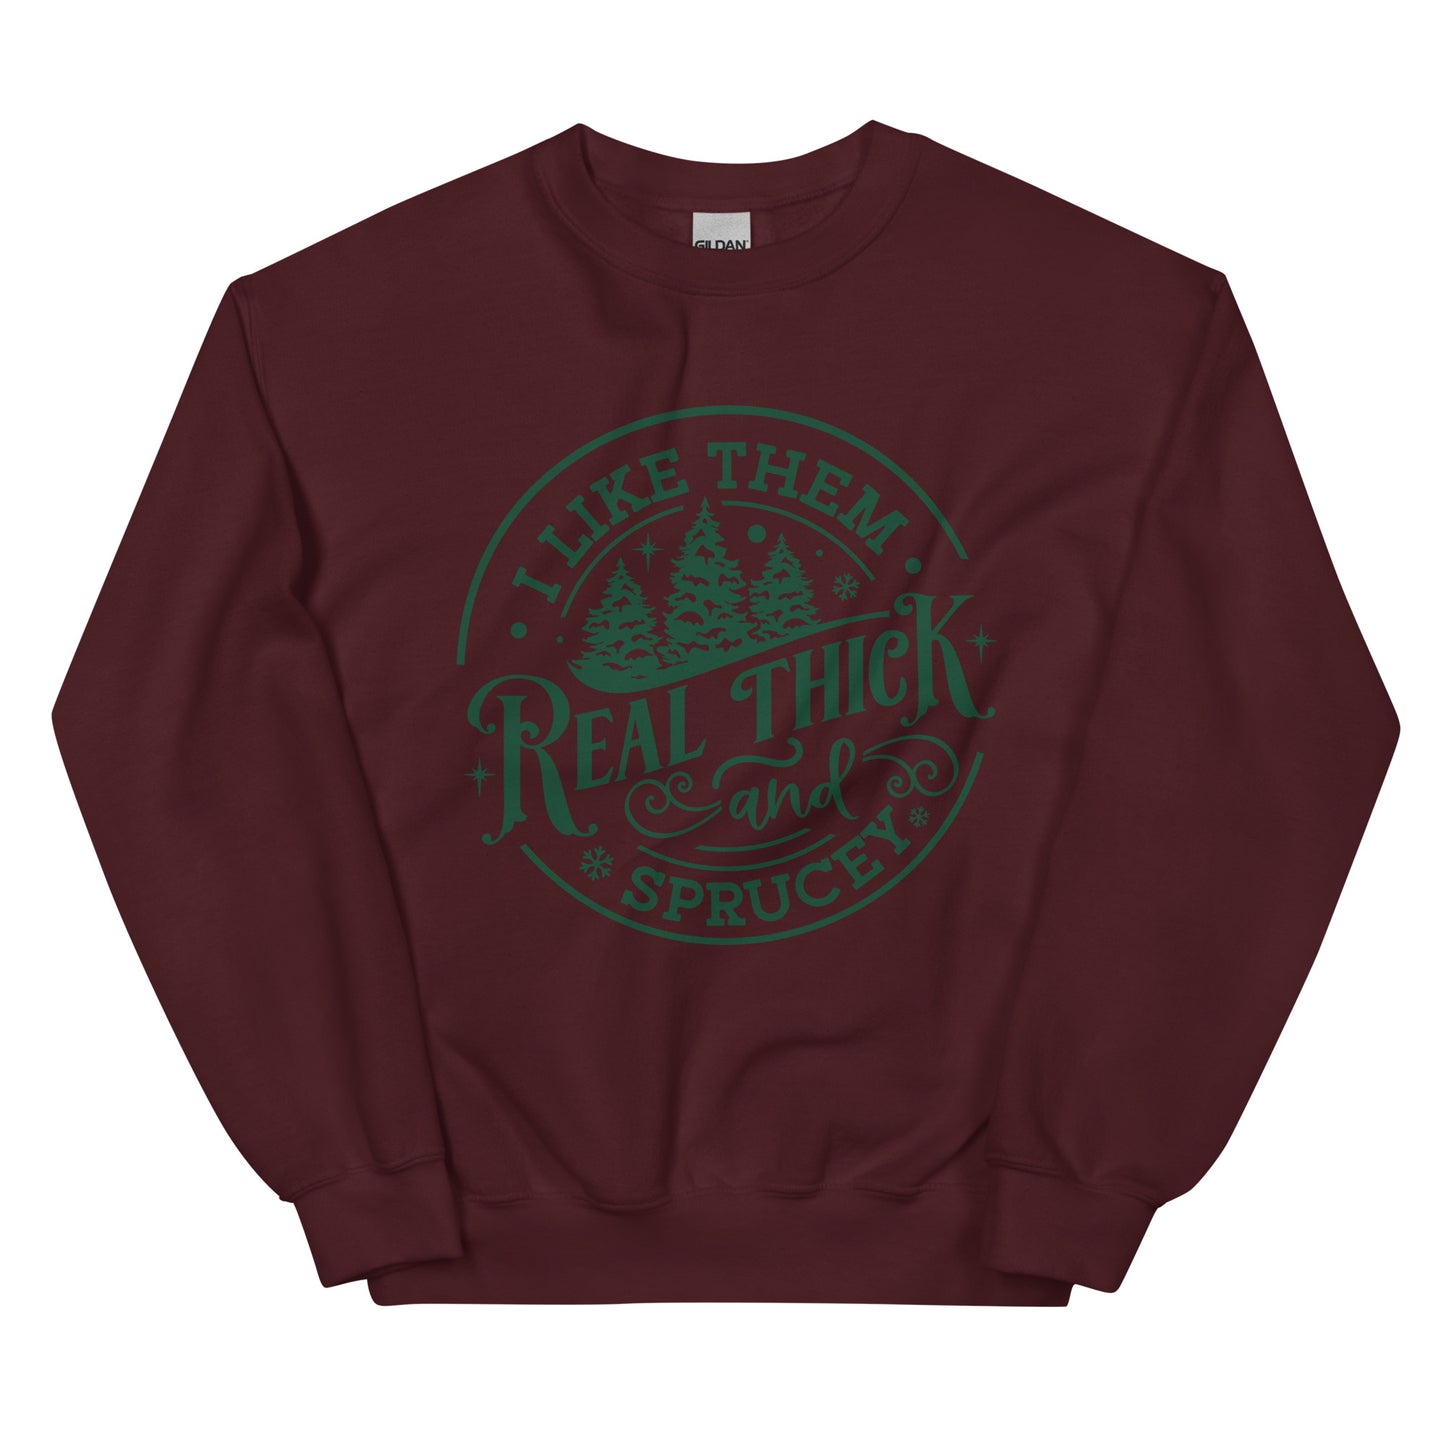 Real Thick and Sprucey Sweatshirt